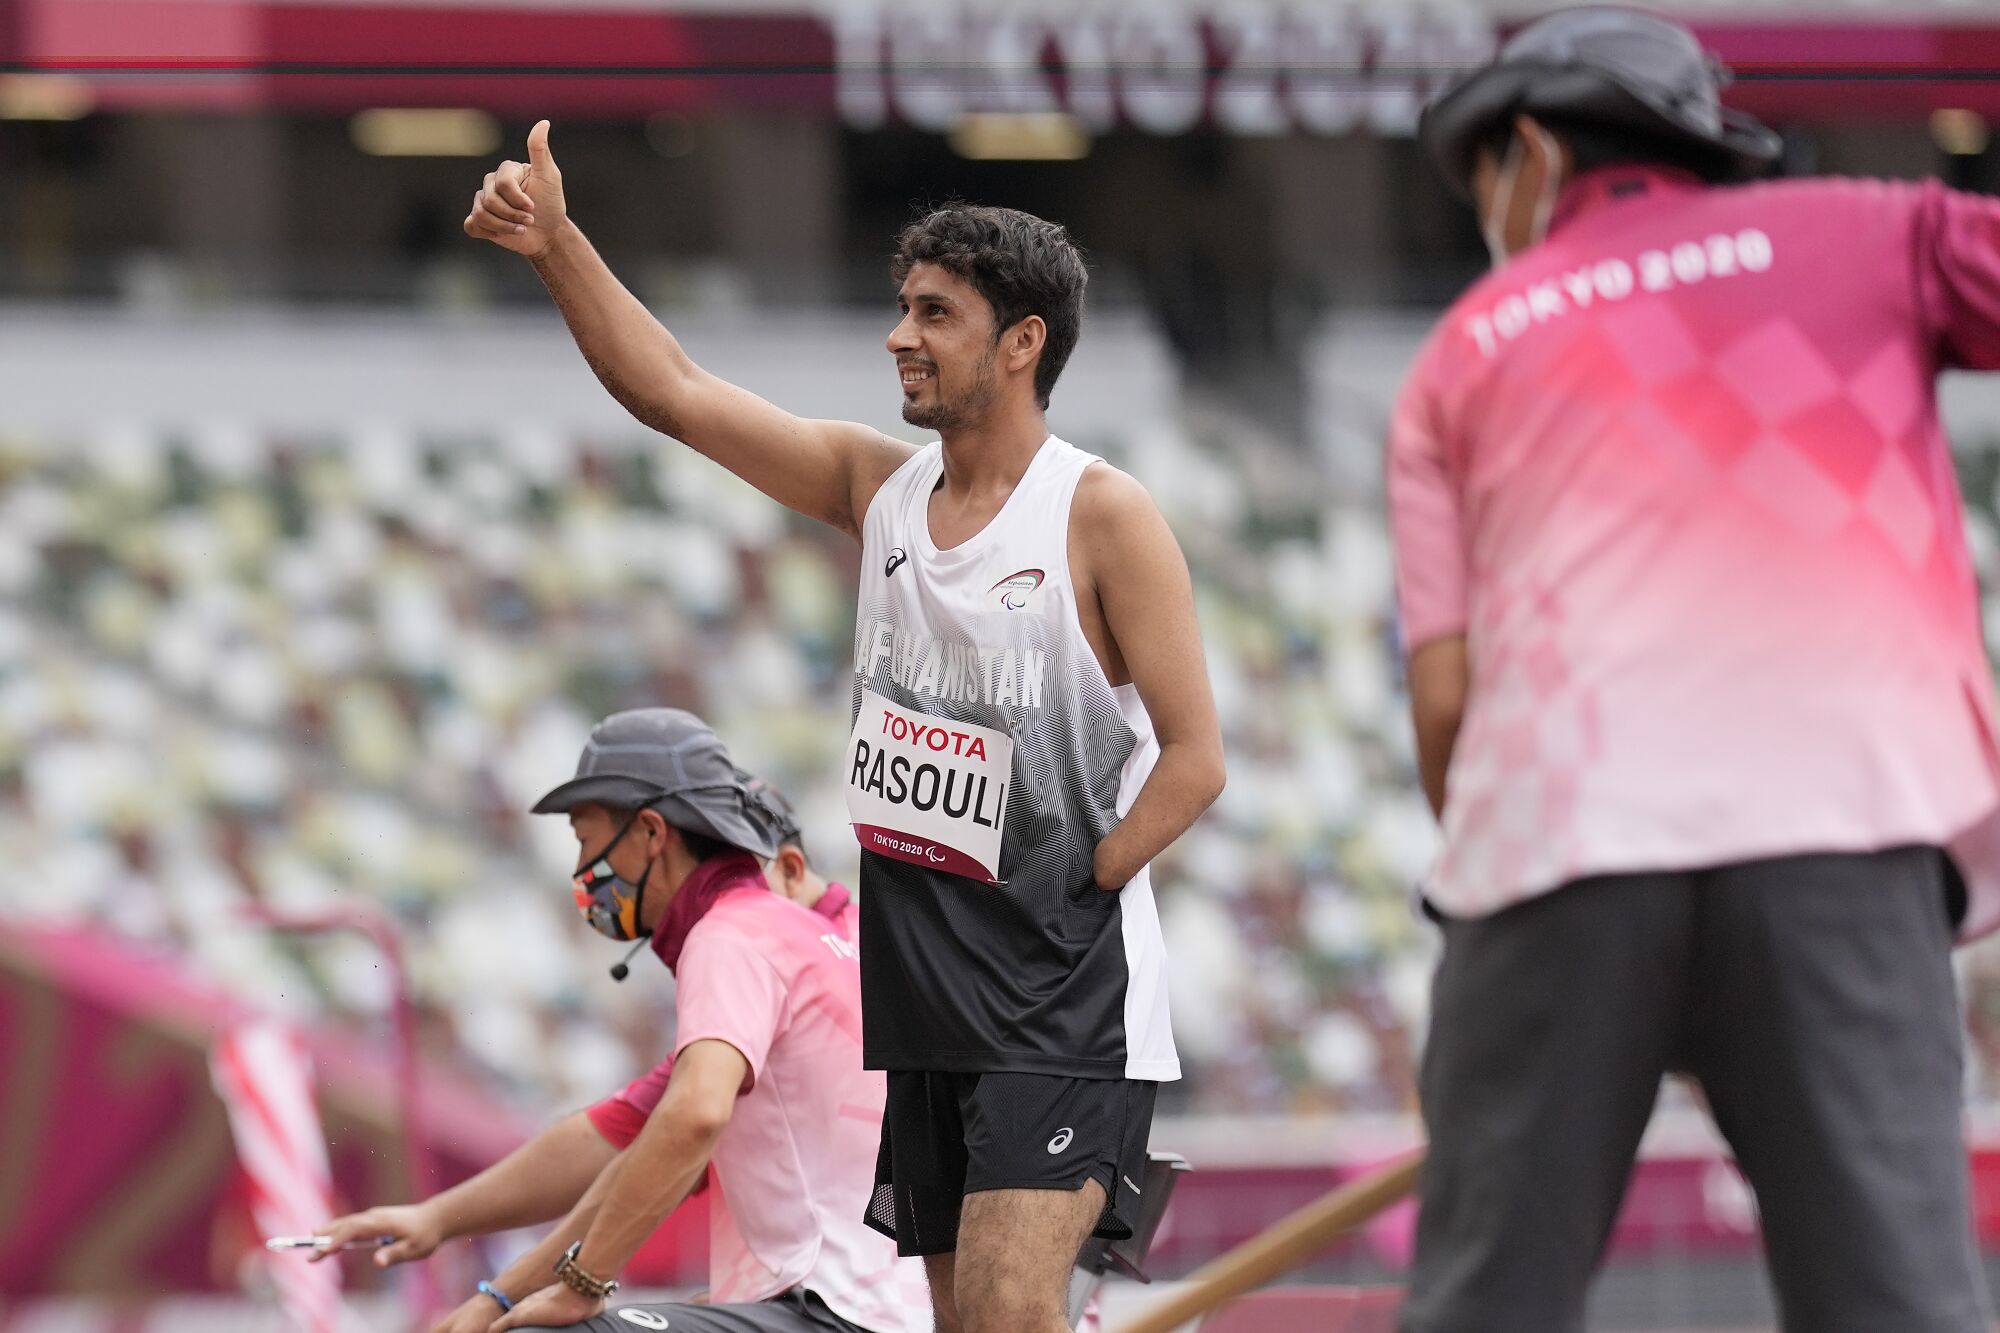 Afghanistan's Hossain Rasouli gives a thumbs up after his first attempt in the men's long jump.